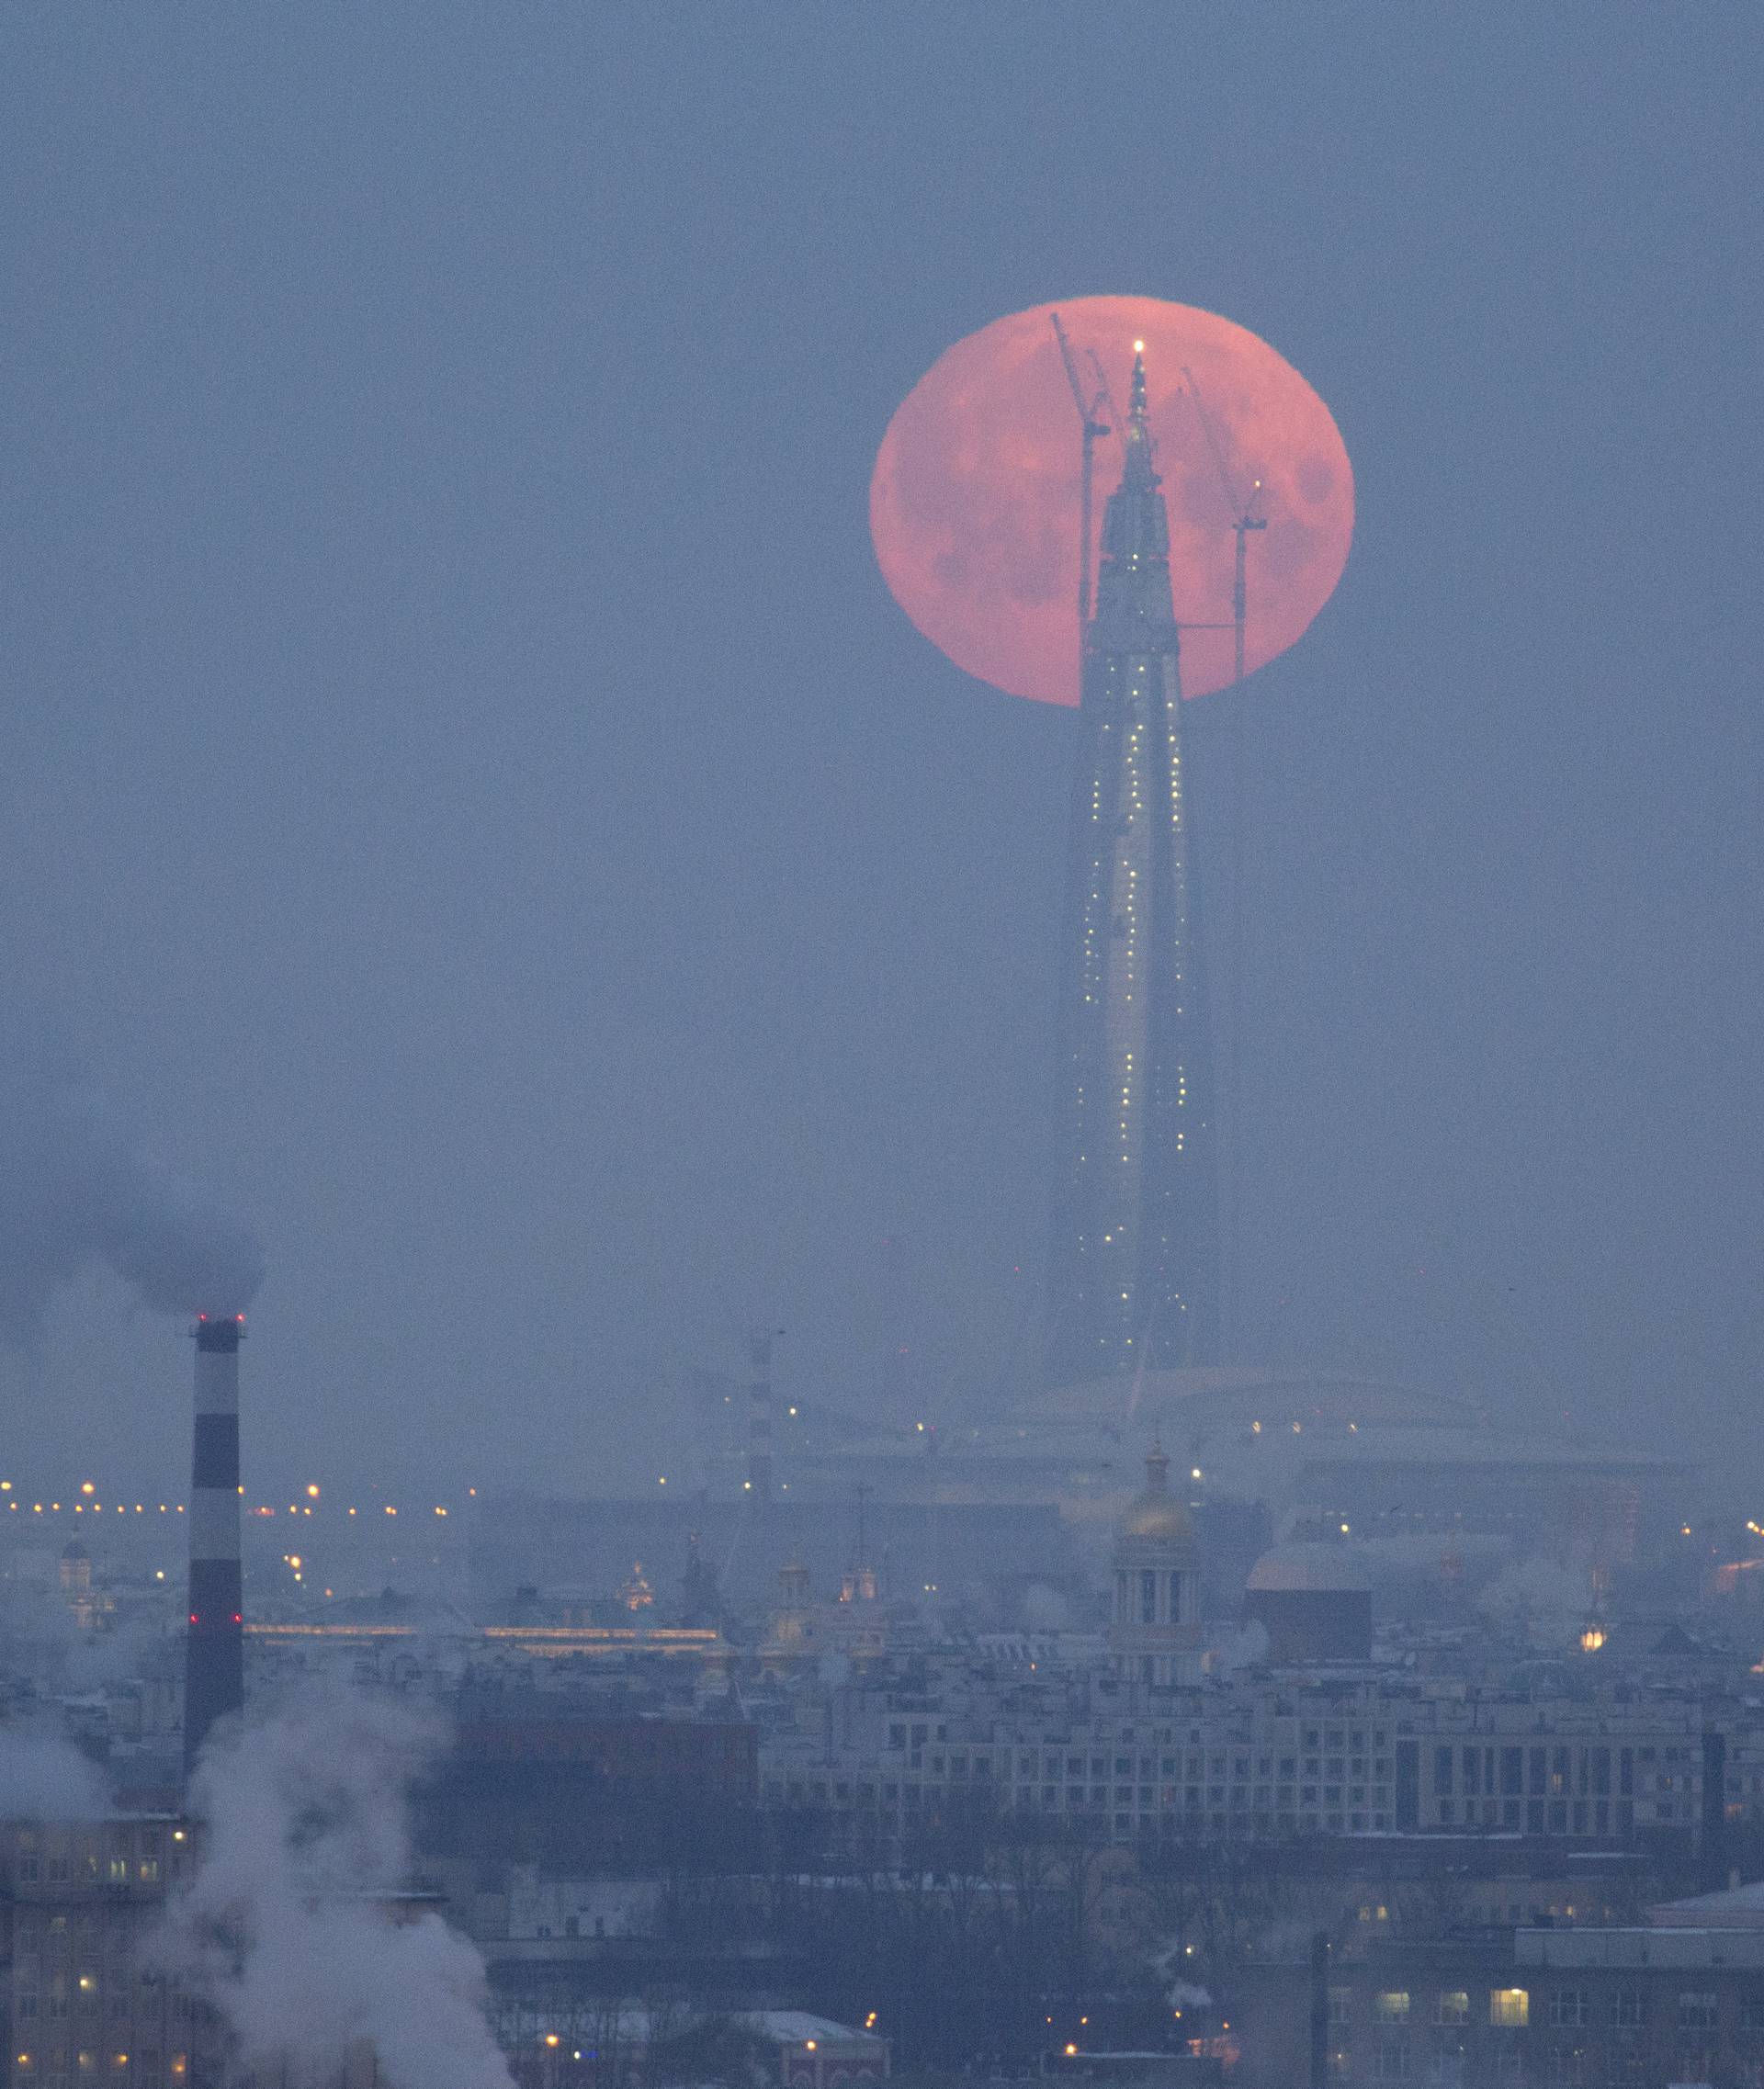 A full moon is seen behind the business tower Lakhta Centre in St. Petersburg